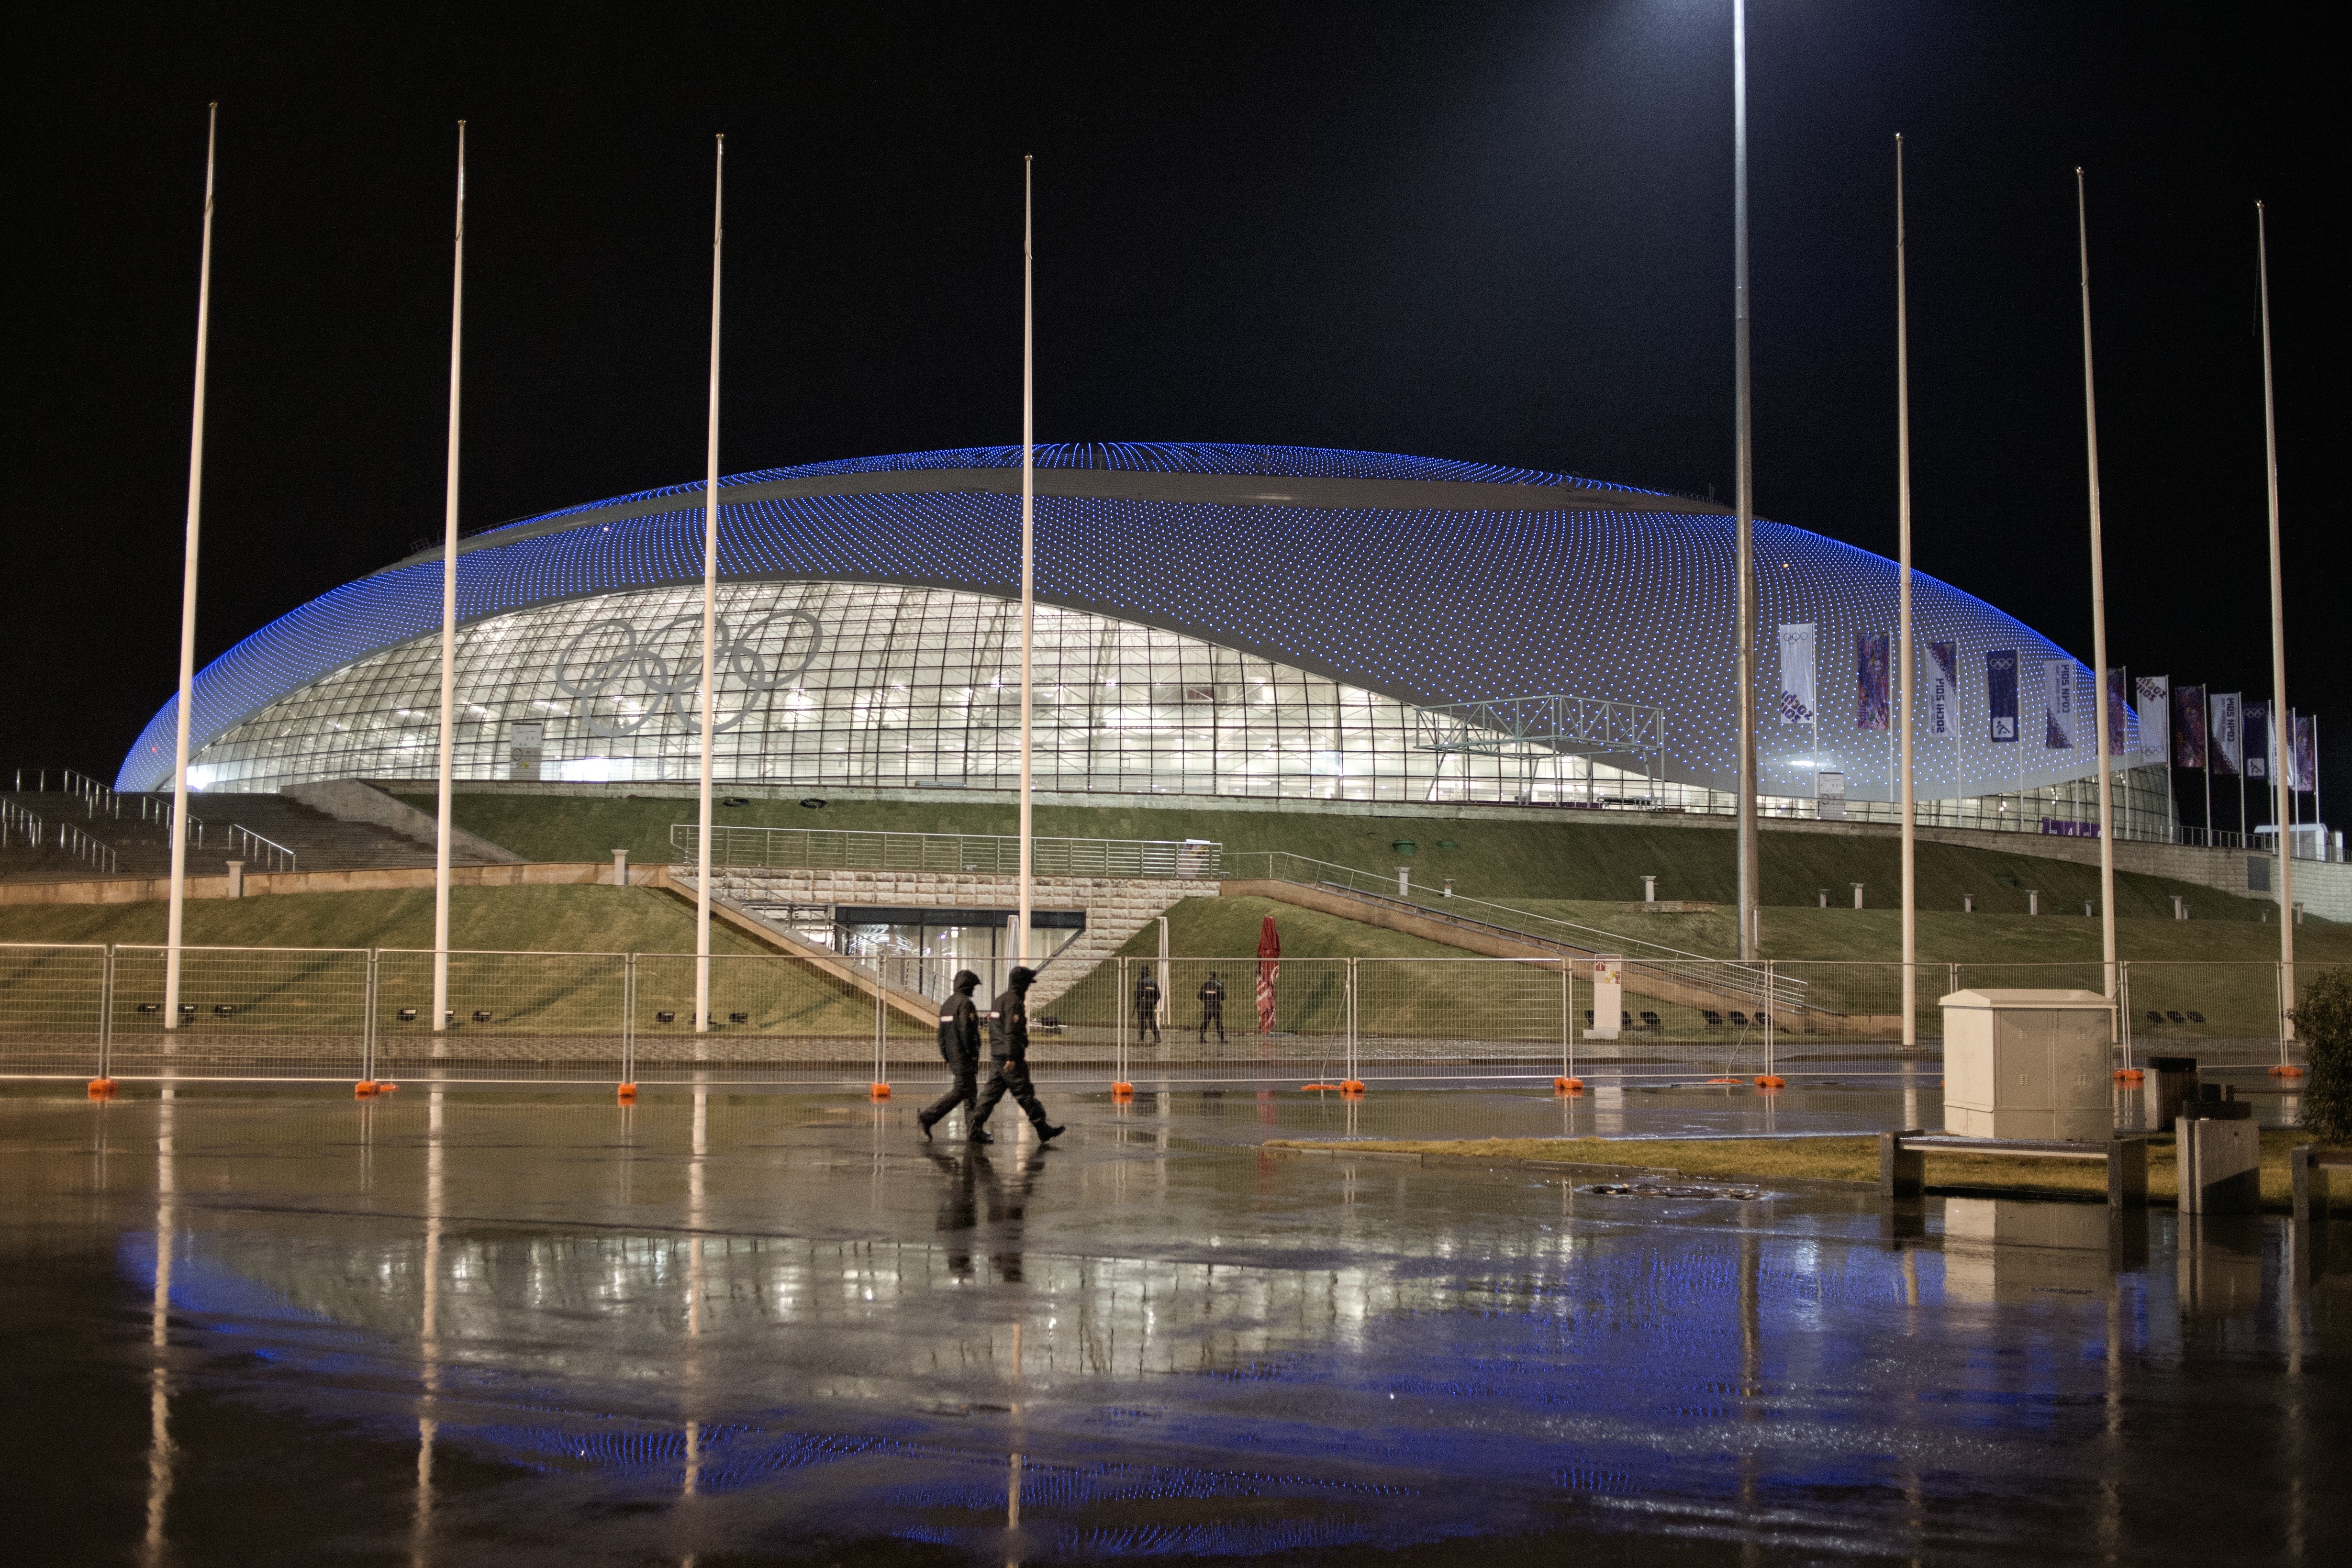 Sochi, Russia, Jan. 17, 2014:
                              The  Coastal Cluster  building on Sochi's Black Sea waterfront will host the opening and closing ceremonies, skating, and ice hockey